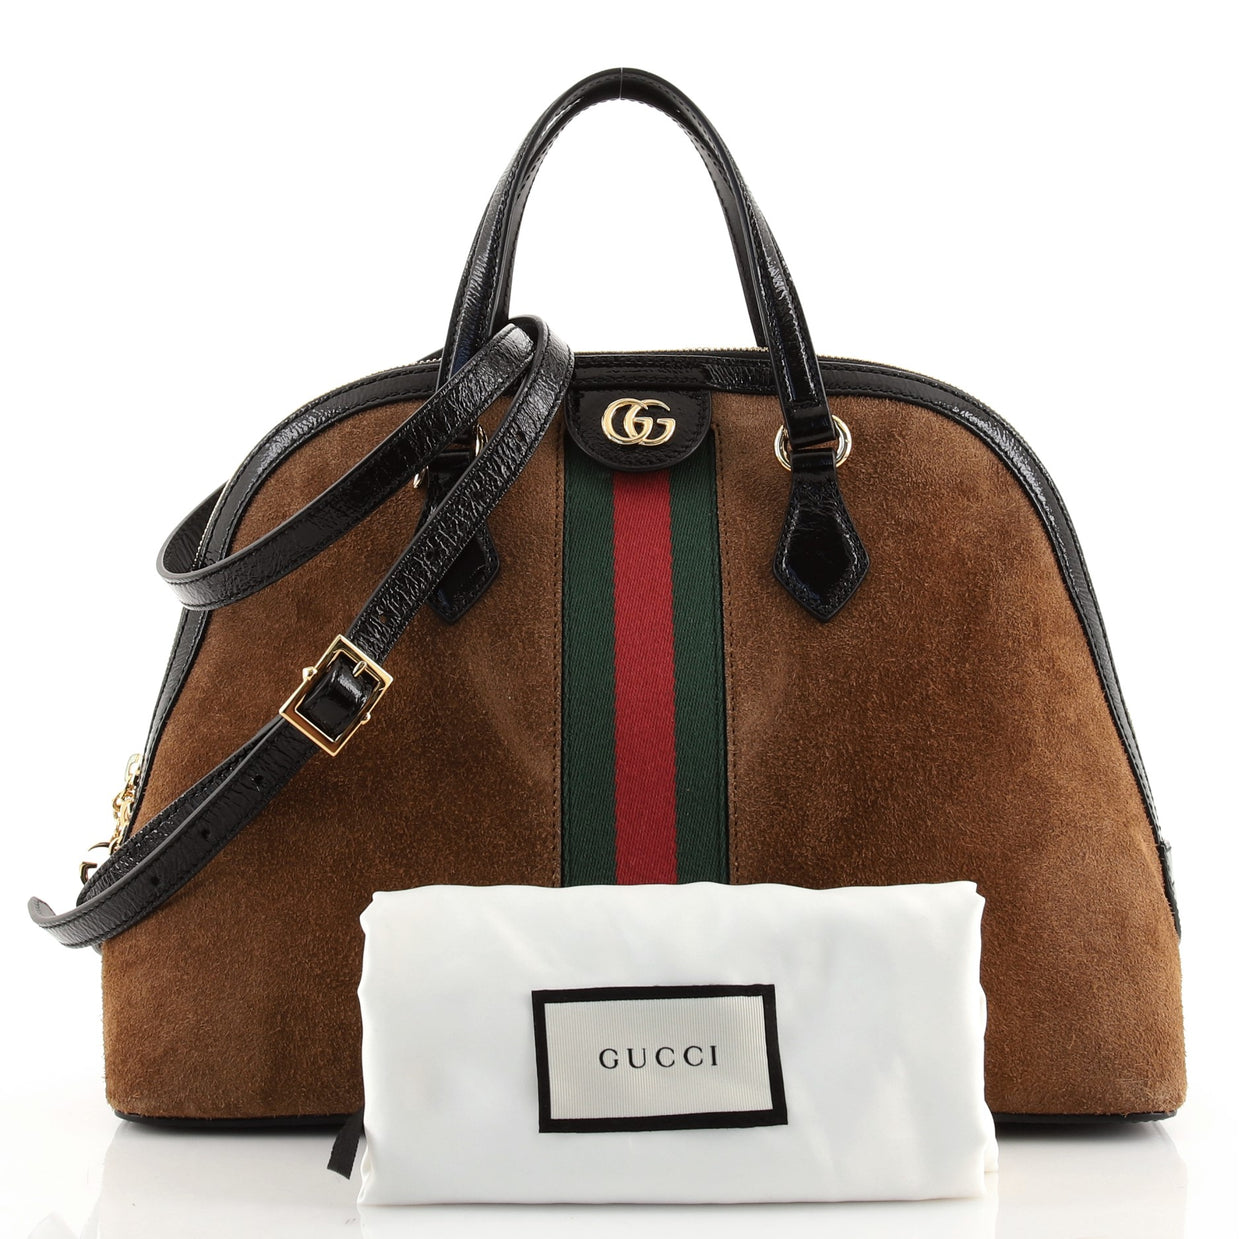 Gucci Ophidia Dome Top Handle Bag Suede Medium Brown 856521